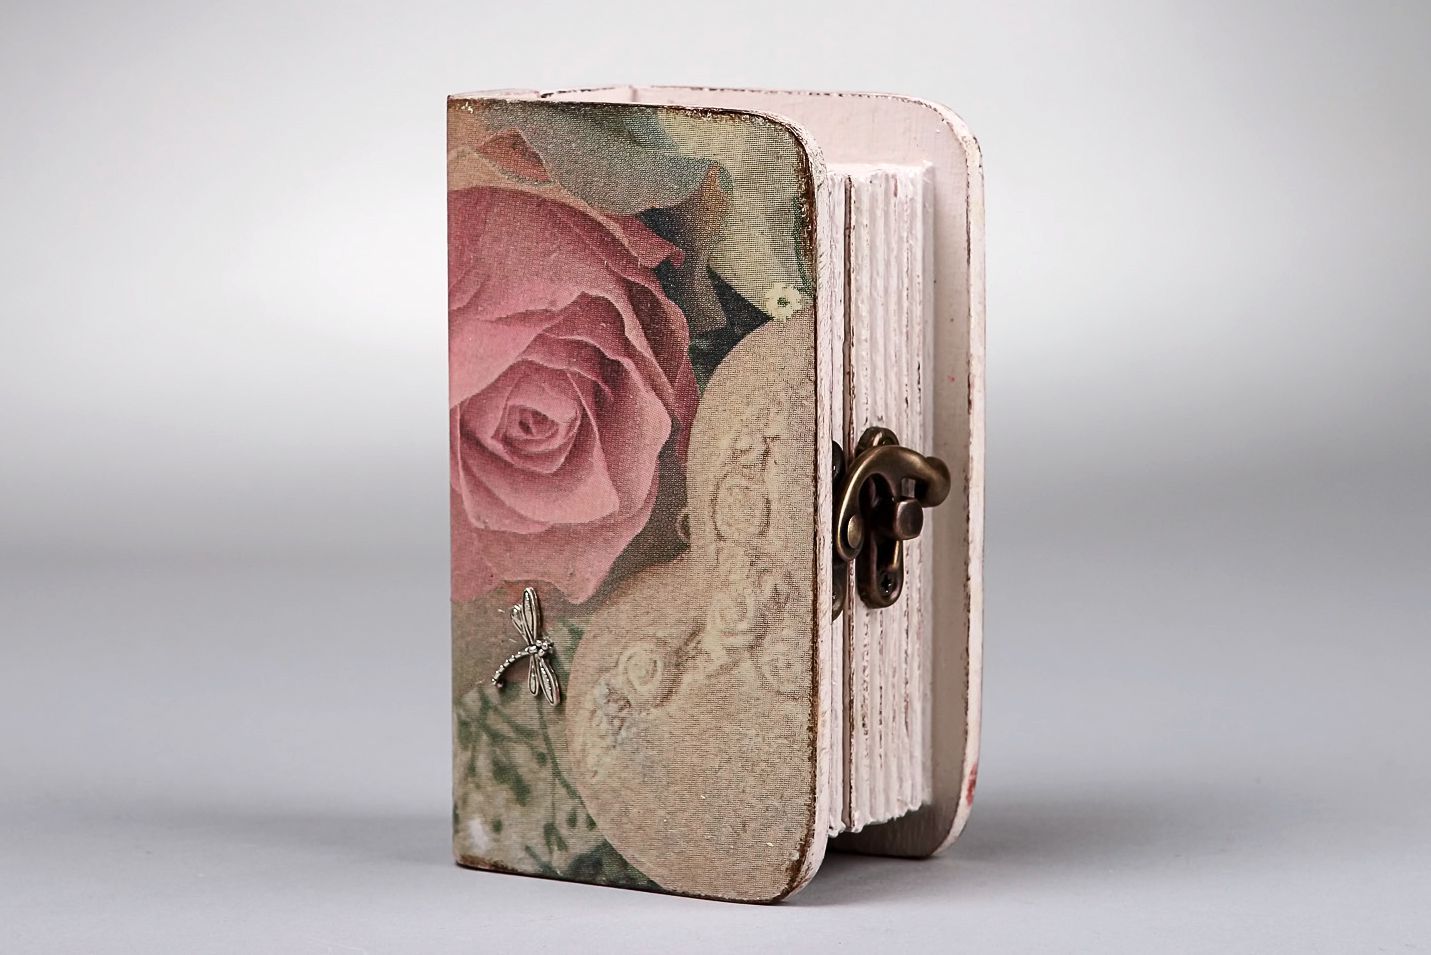 Handmade box in the form of book photo 1